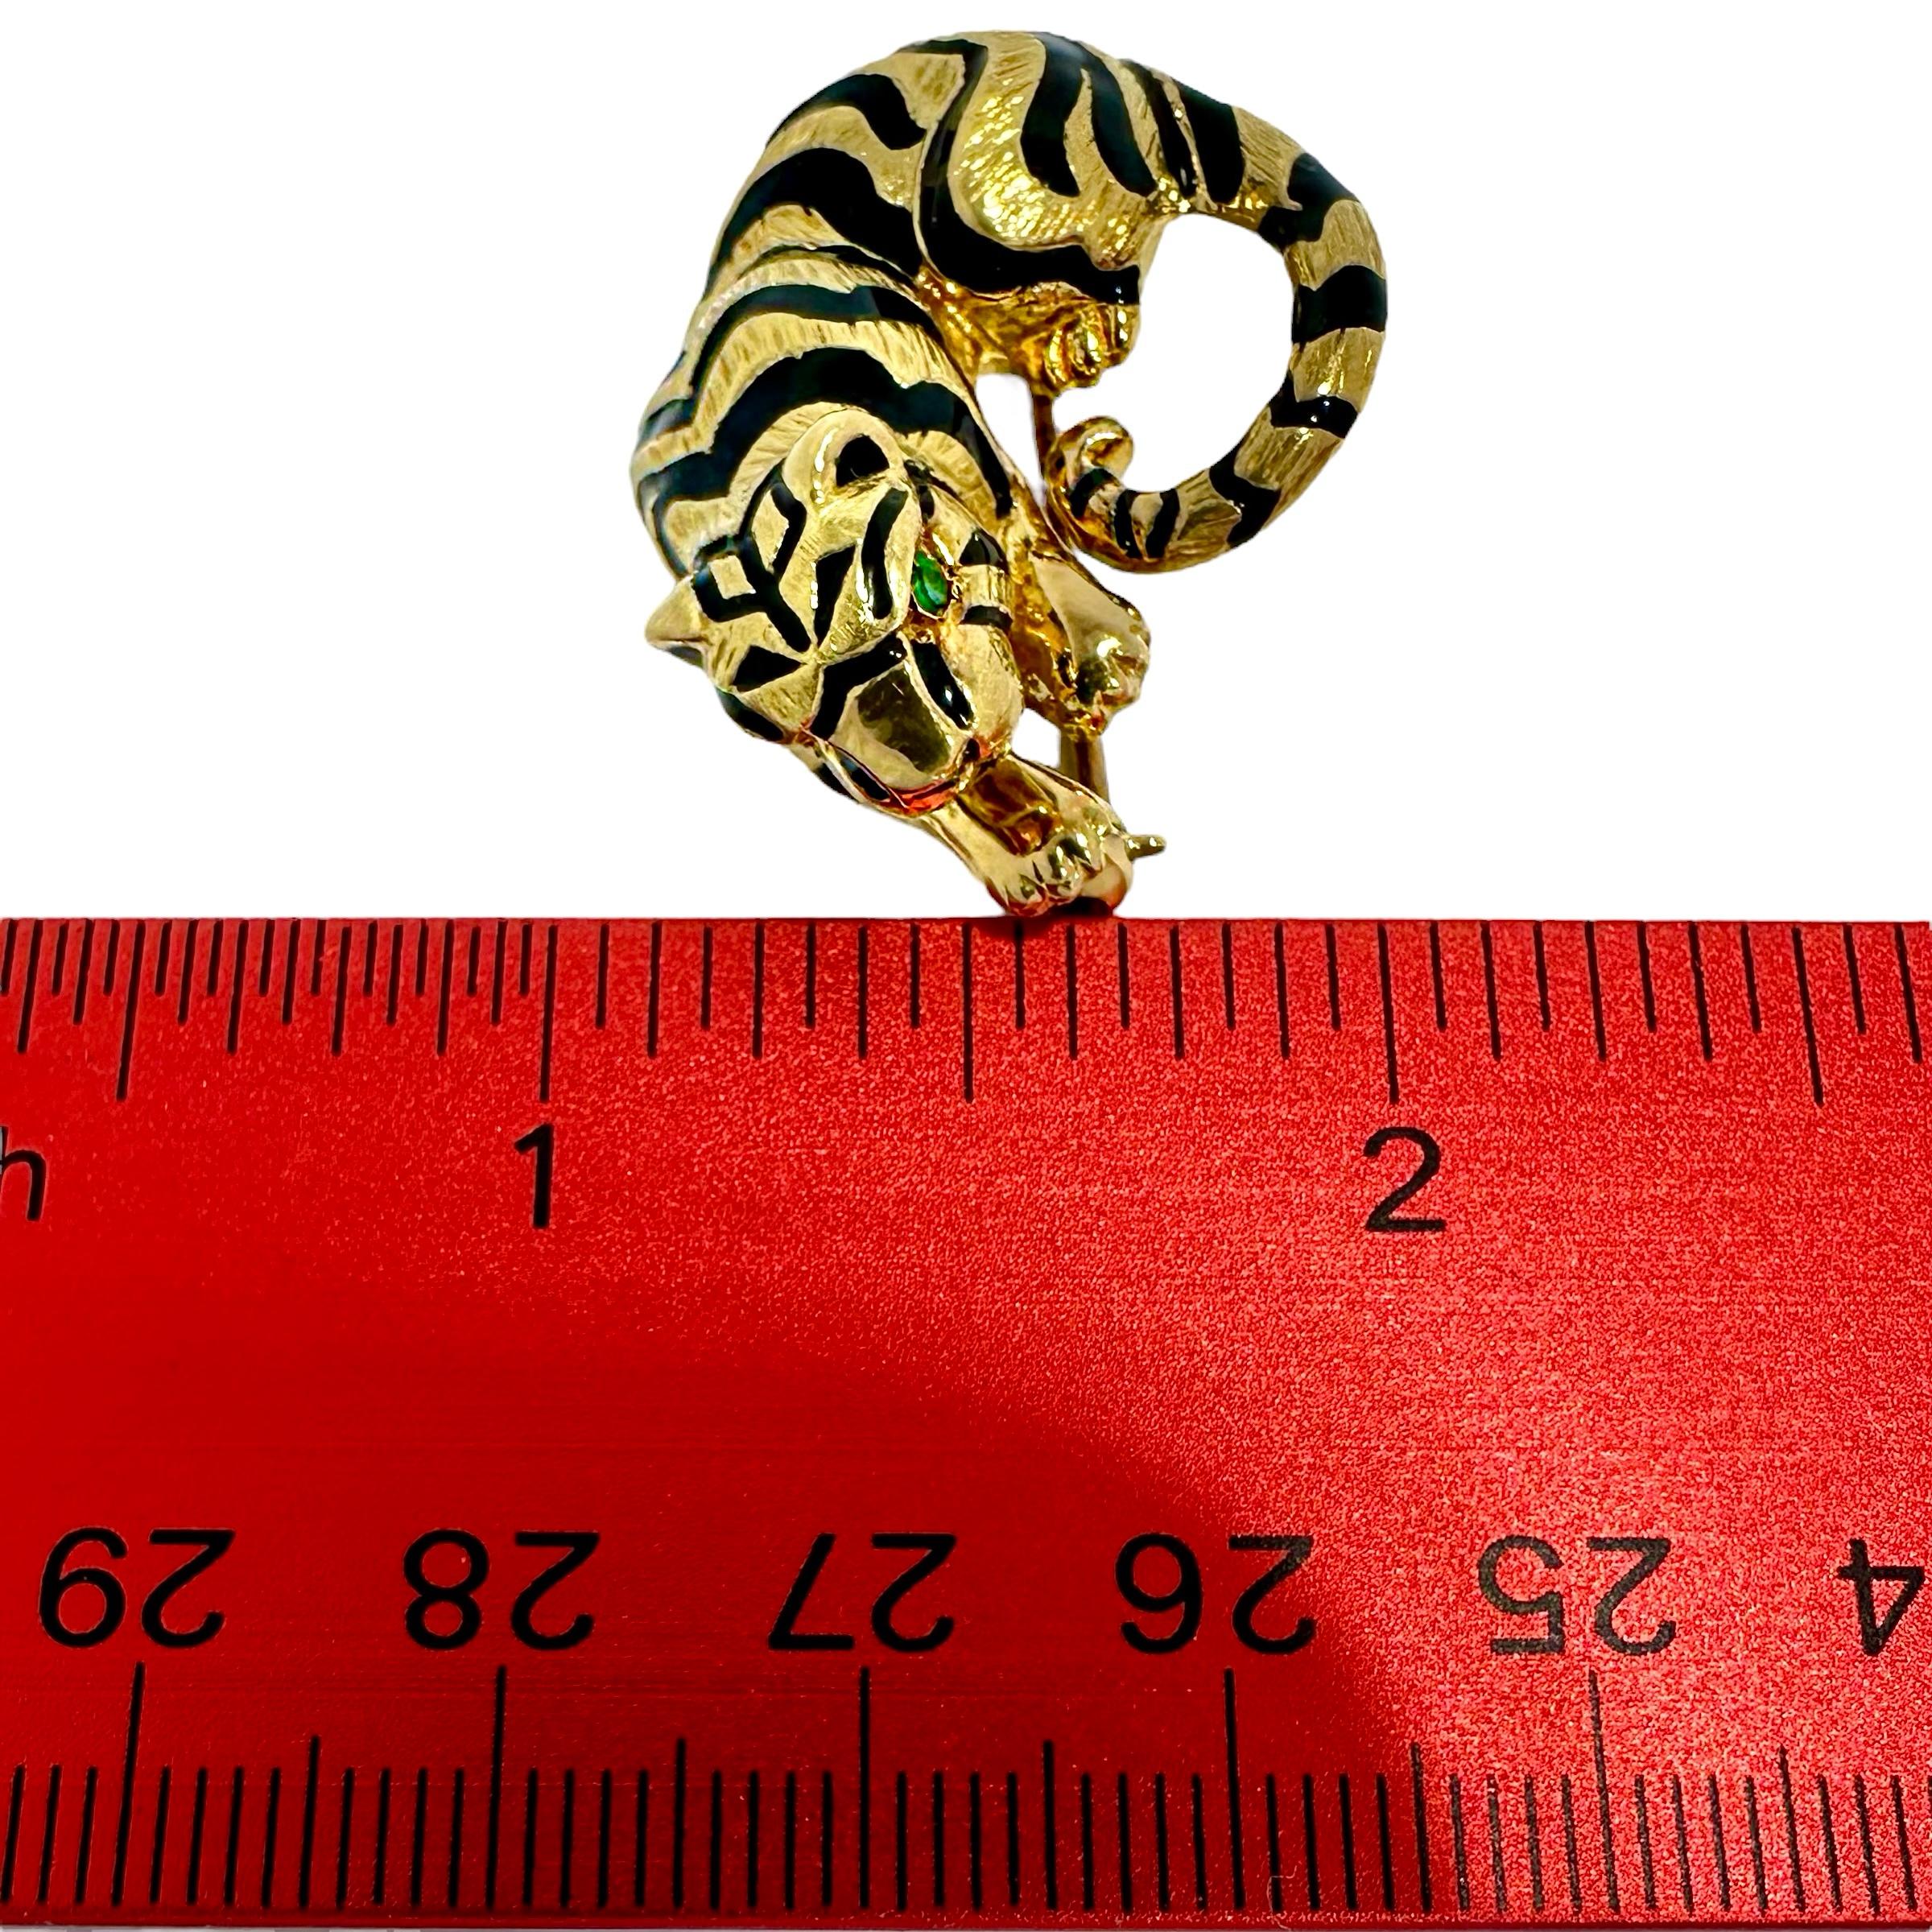 Diminutive, Lifelike, Yellow Gold Tiger Brooch with Enamel & Bright Emerald Eyes For Sale 2